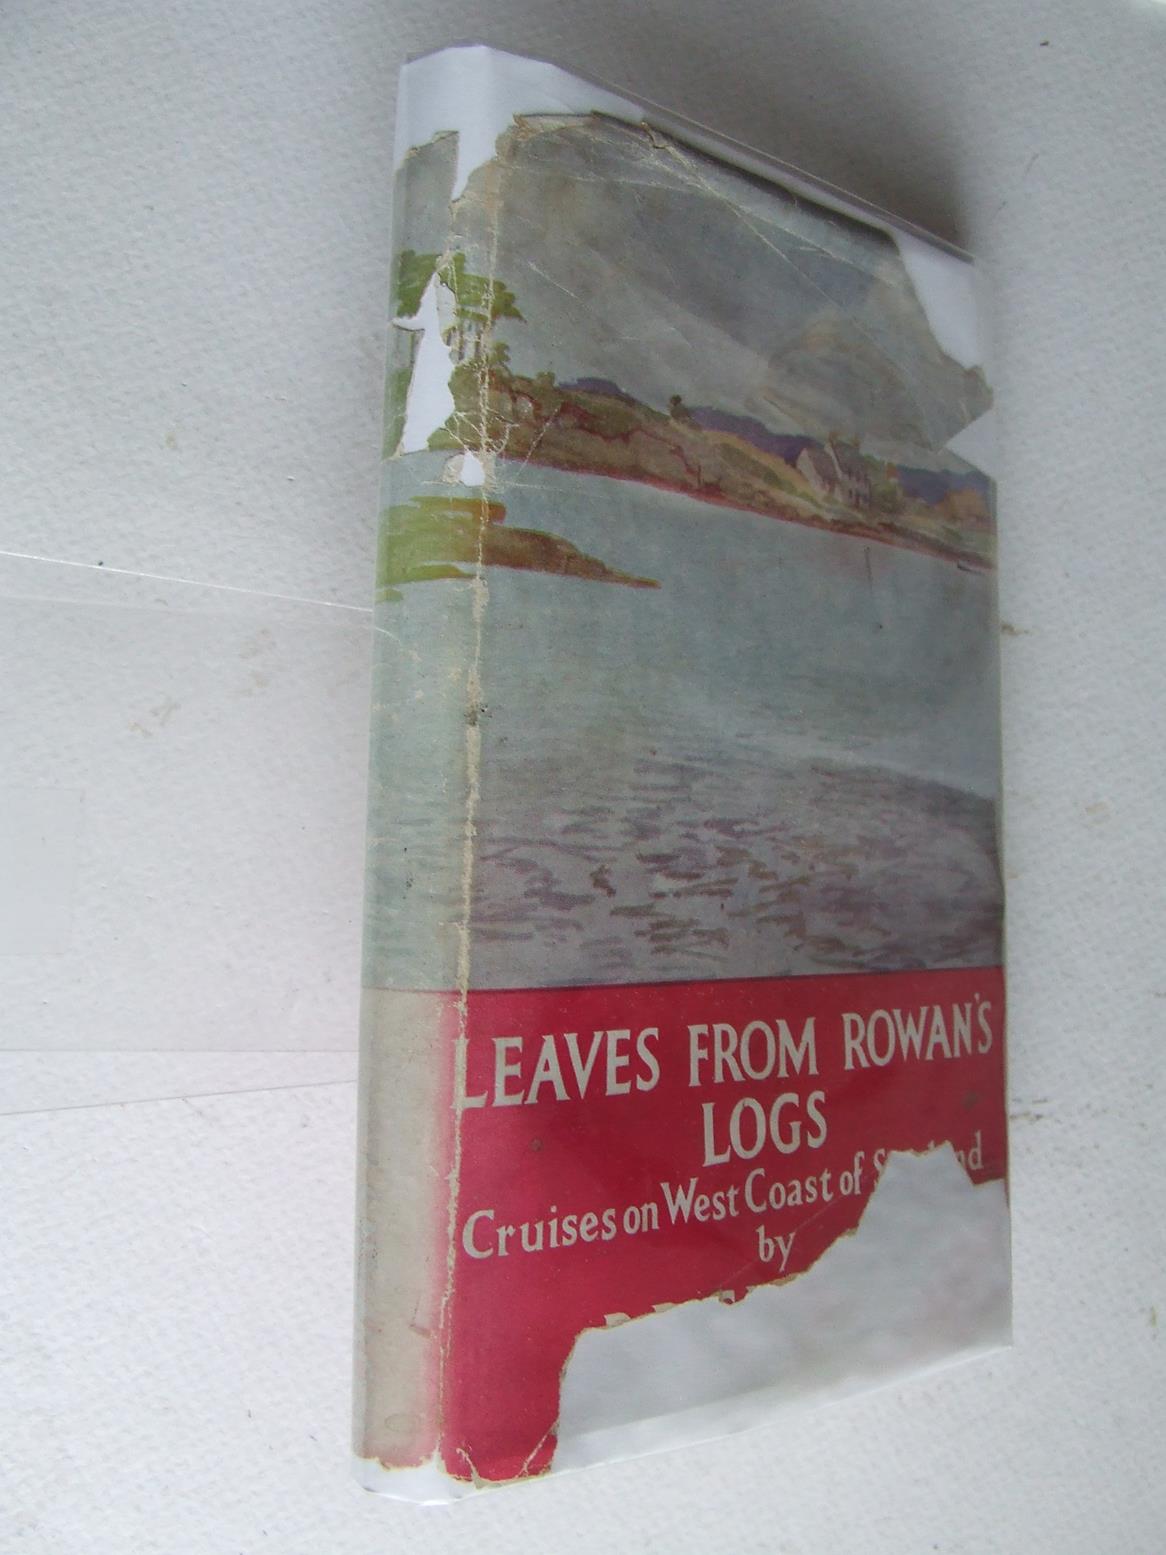 Leaves from Rowan's Logs, cruises on west coast of Scotland